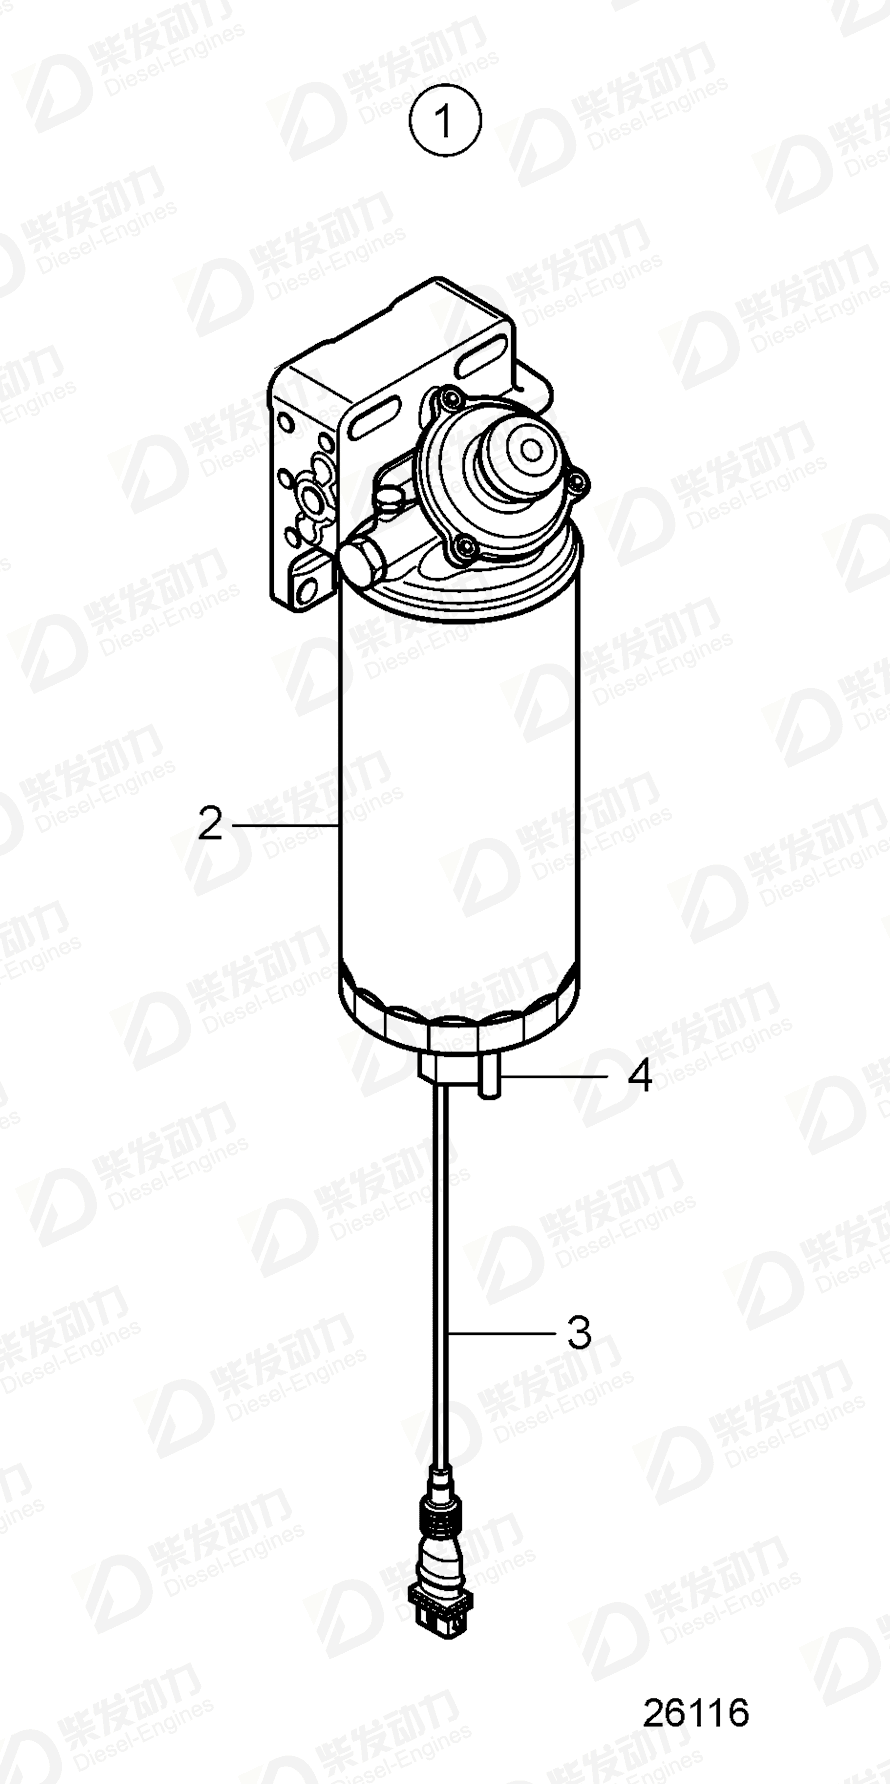 VOLVO Fuel filter 22254193 Drawing